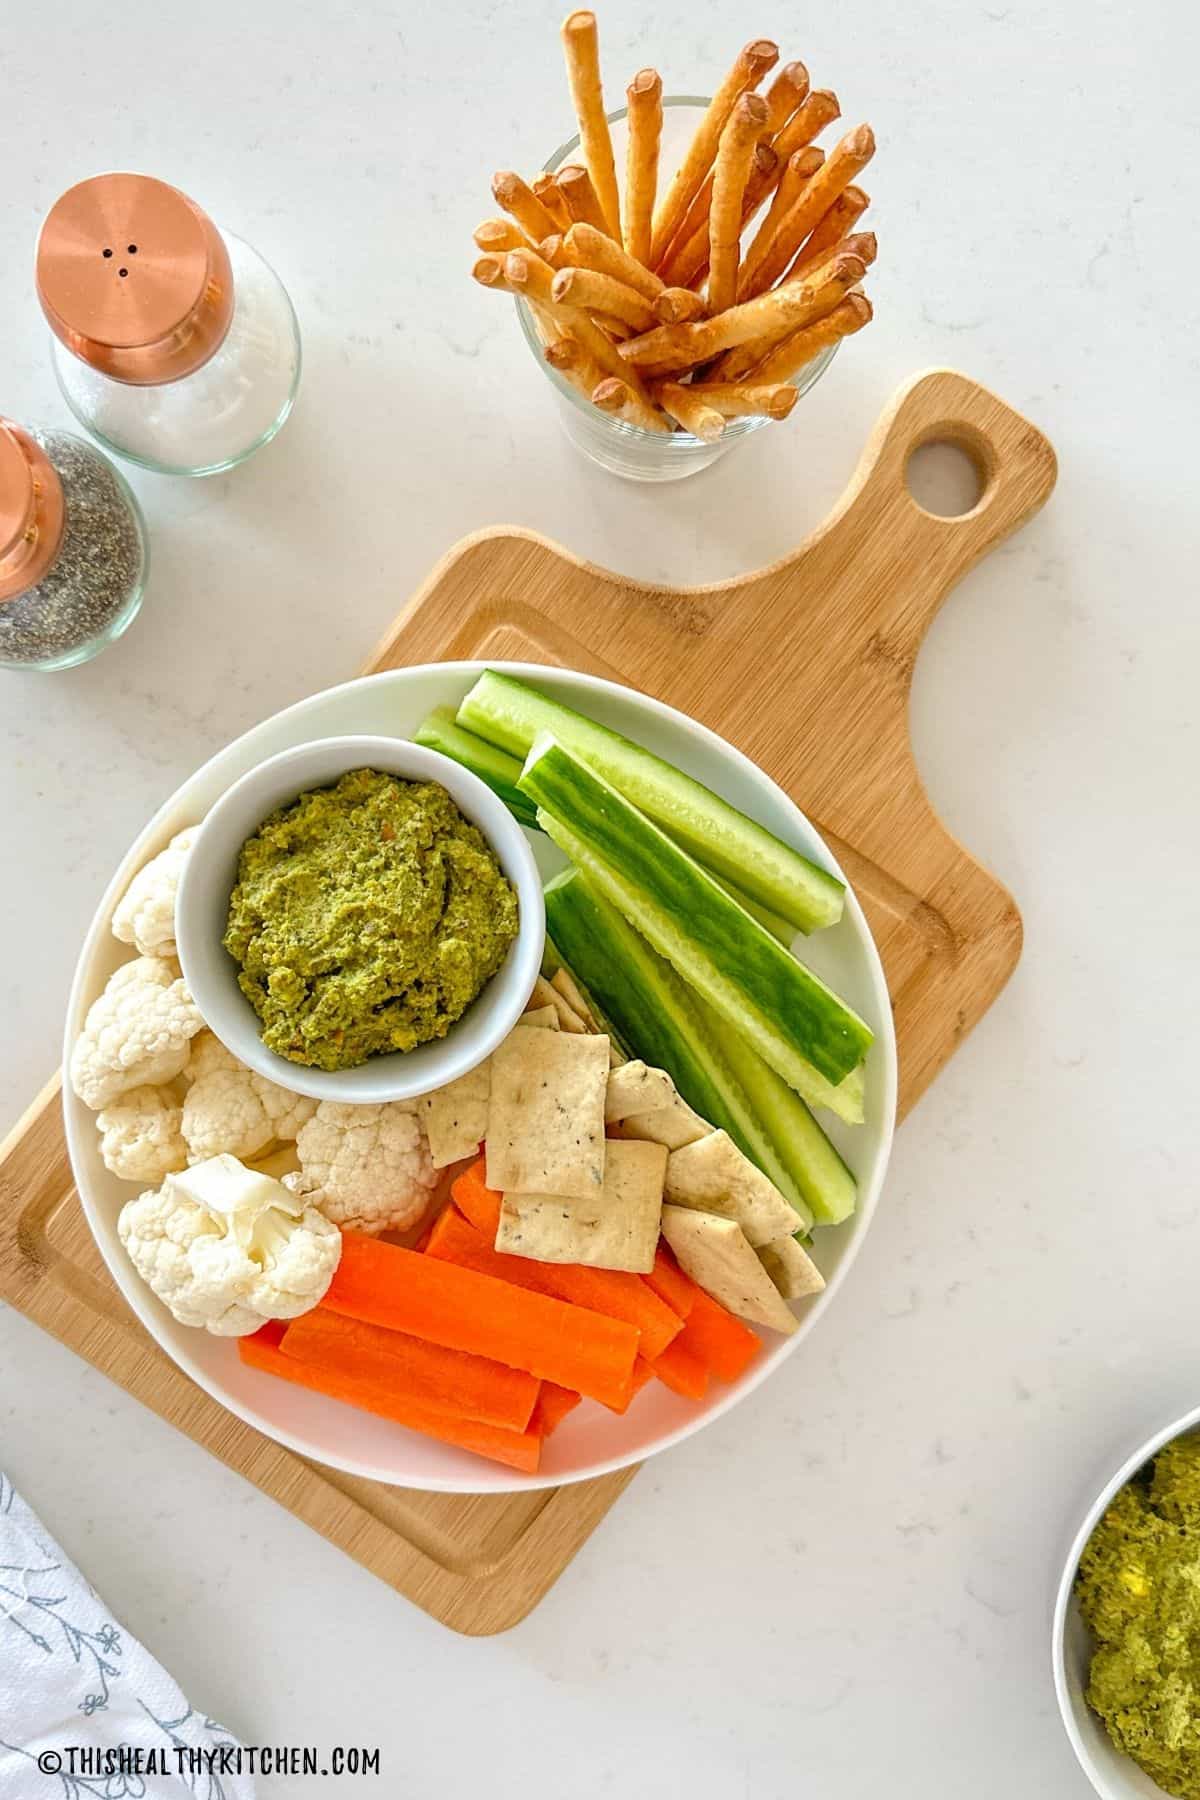 Small dipping bowl of pistachio pesto in plate with raw veggies and crackers around it.